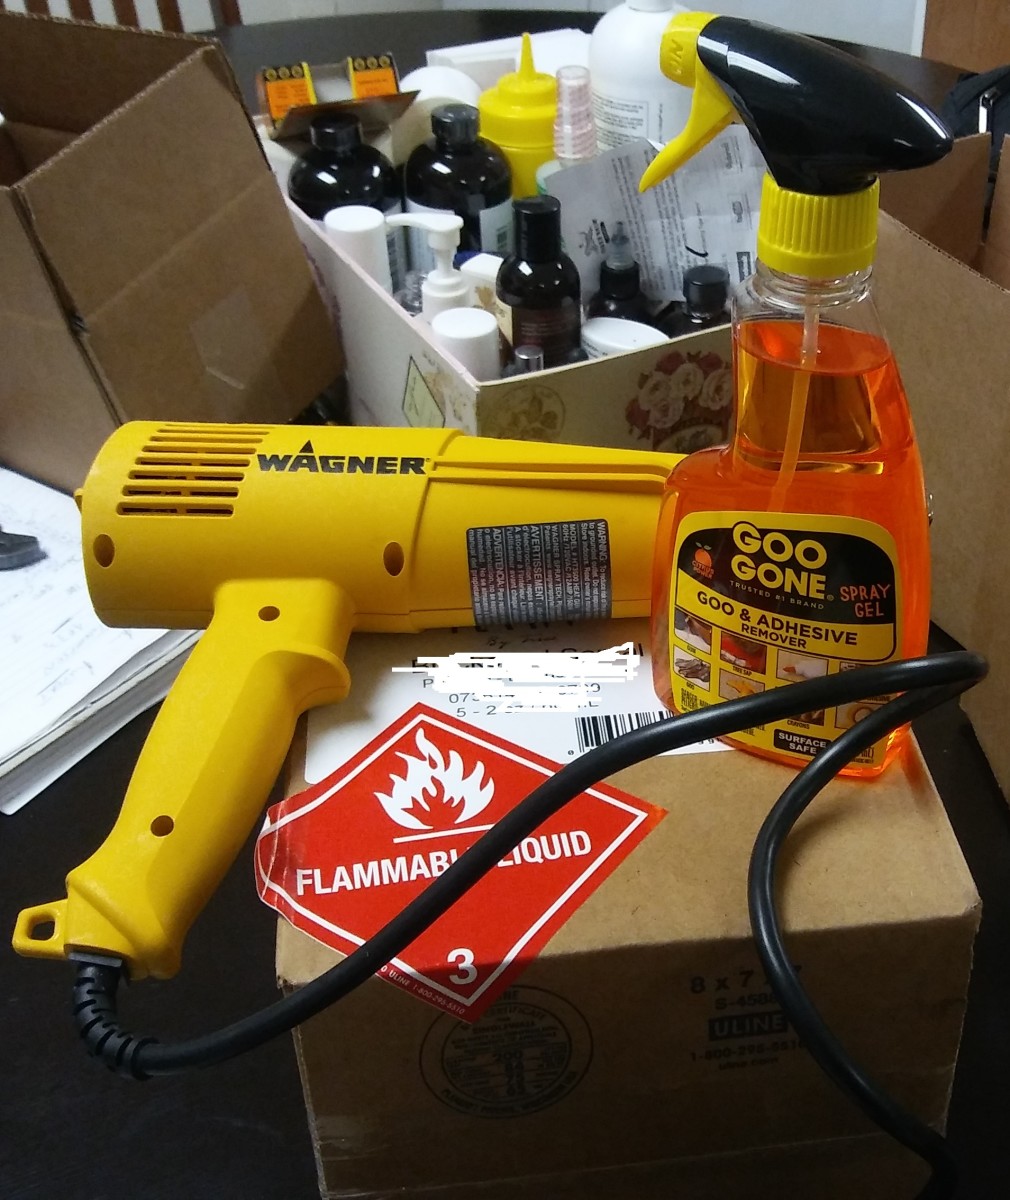 Sticky labels don't stand a chance against these tools.